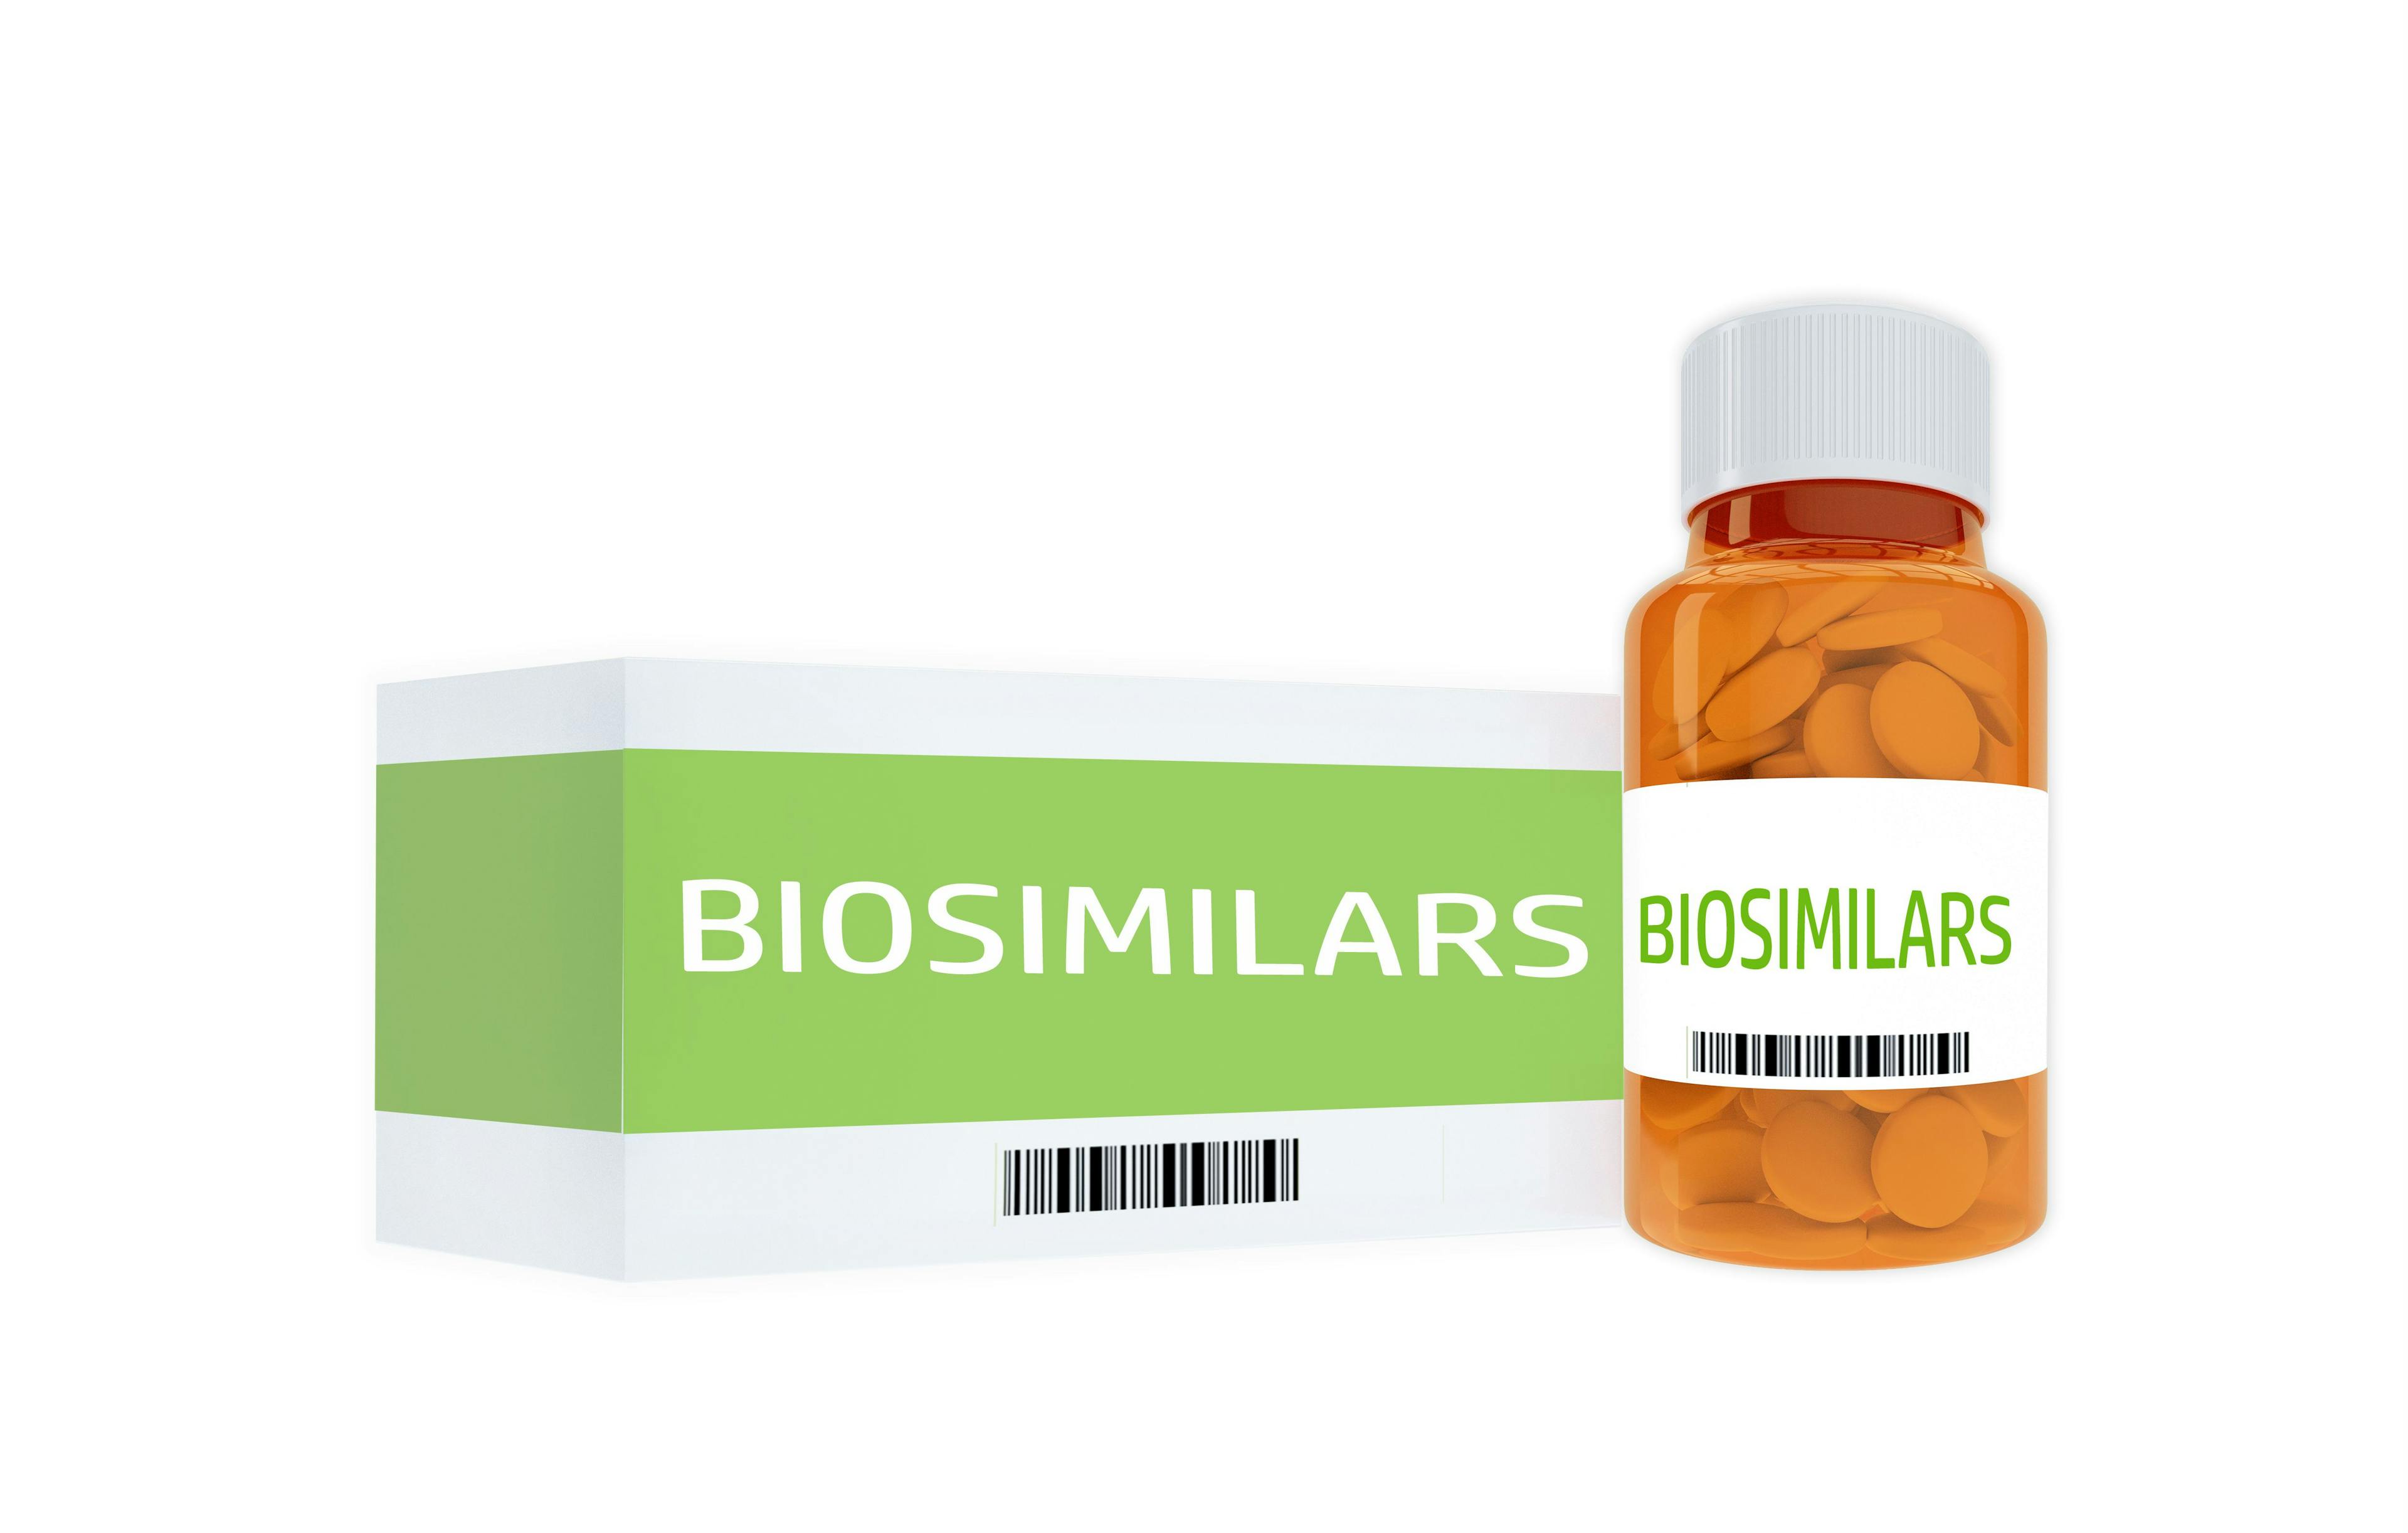 Study: Coverage Restrictions One Reason for Lower Biosimilar Adoption